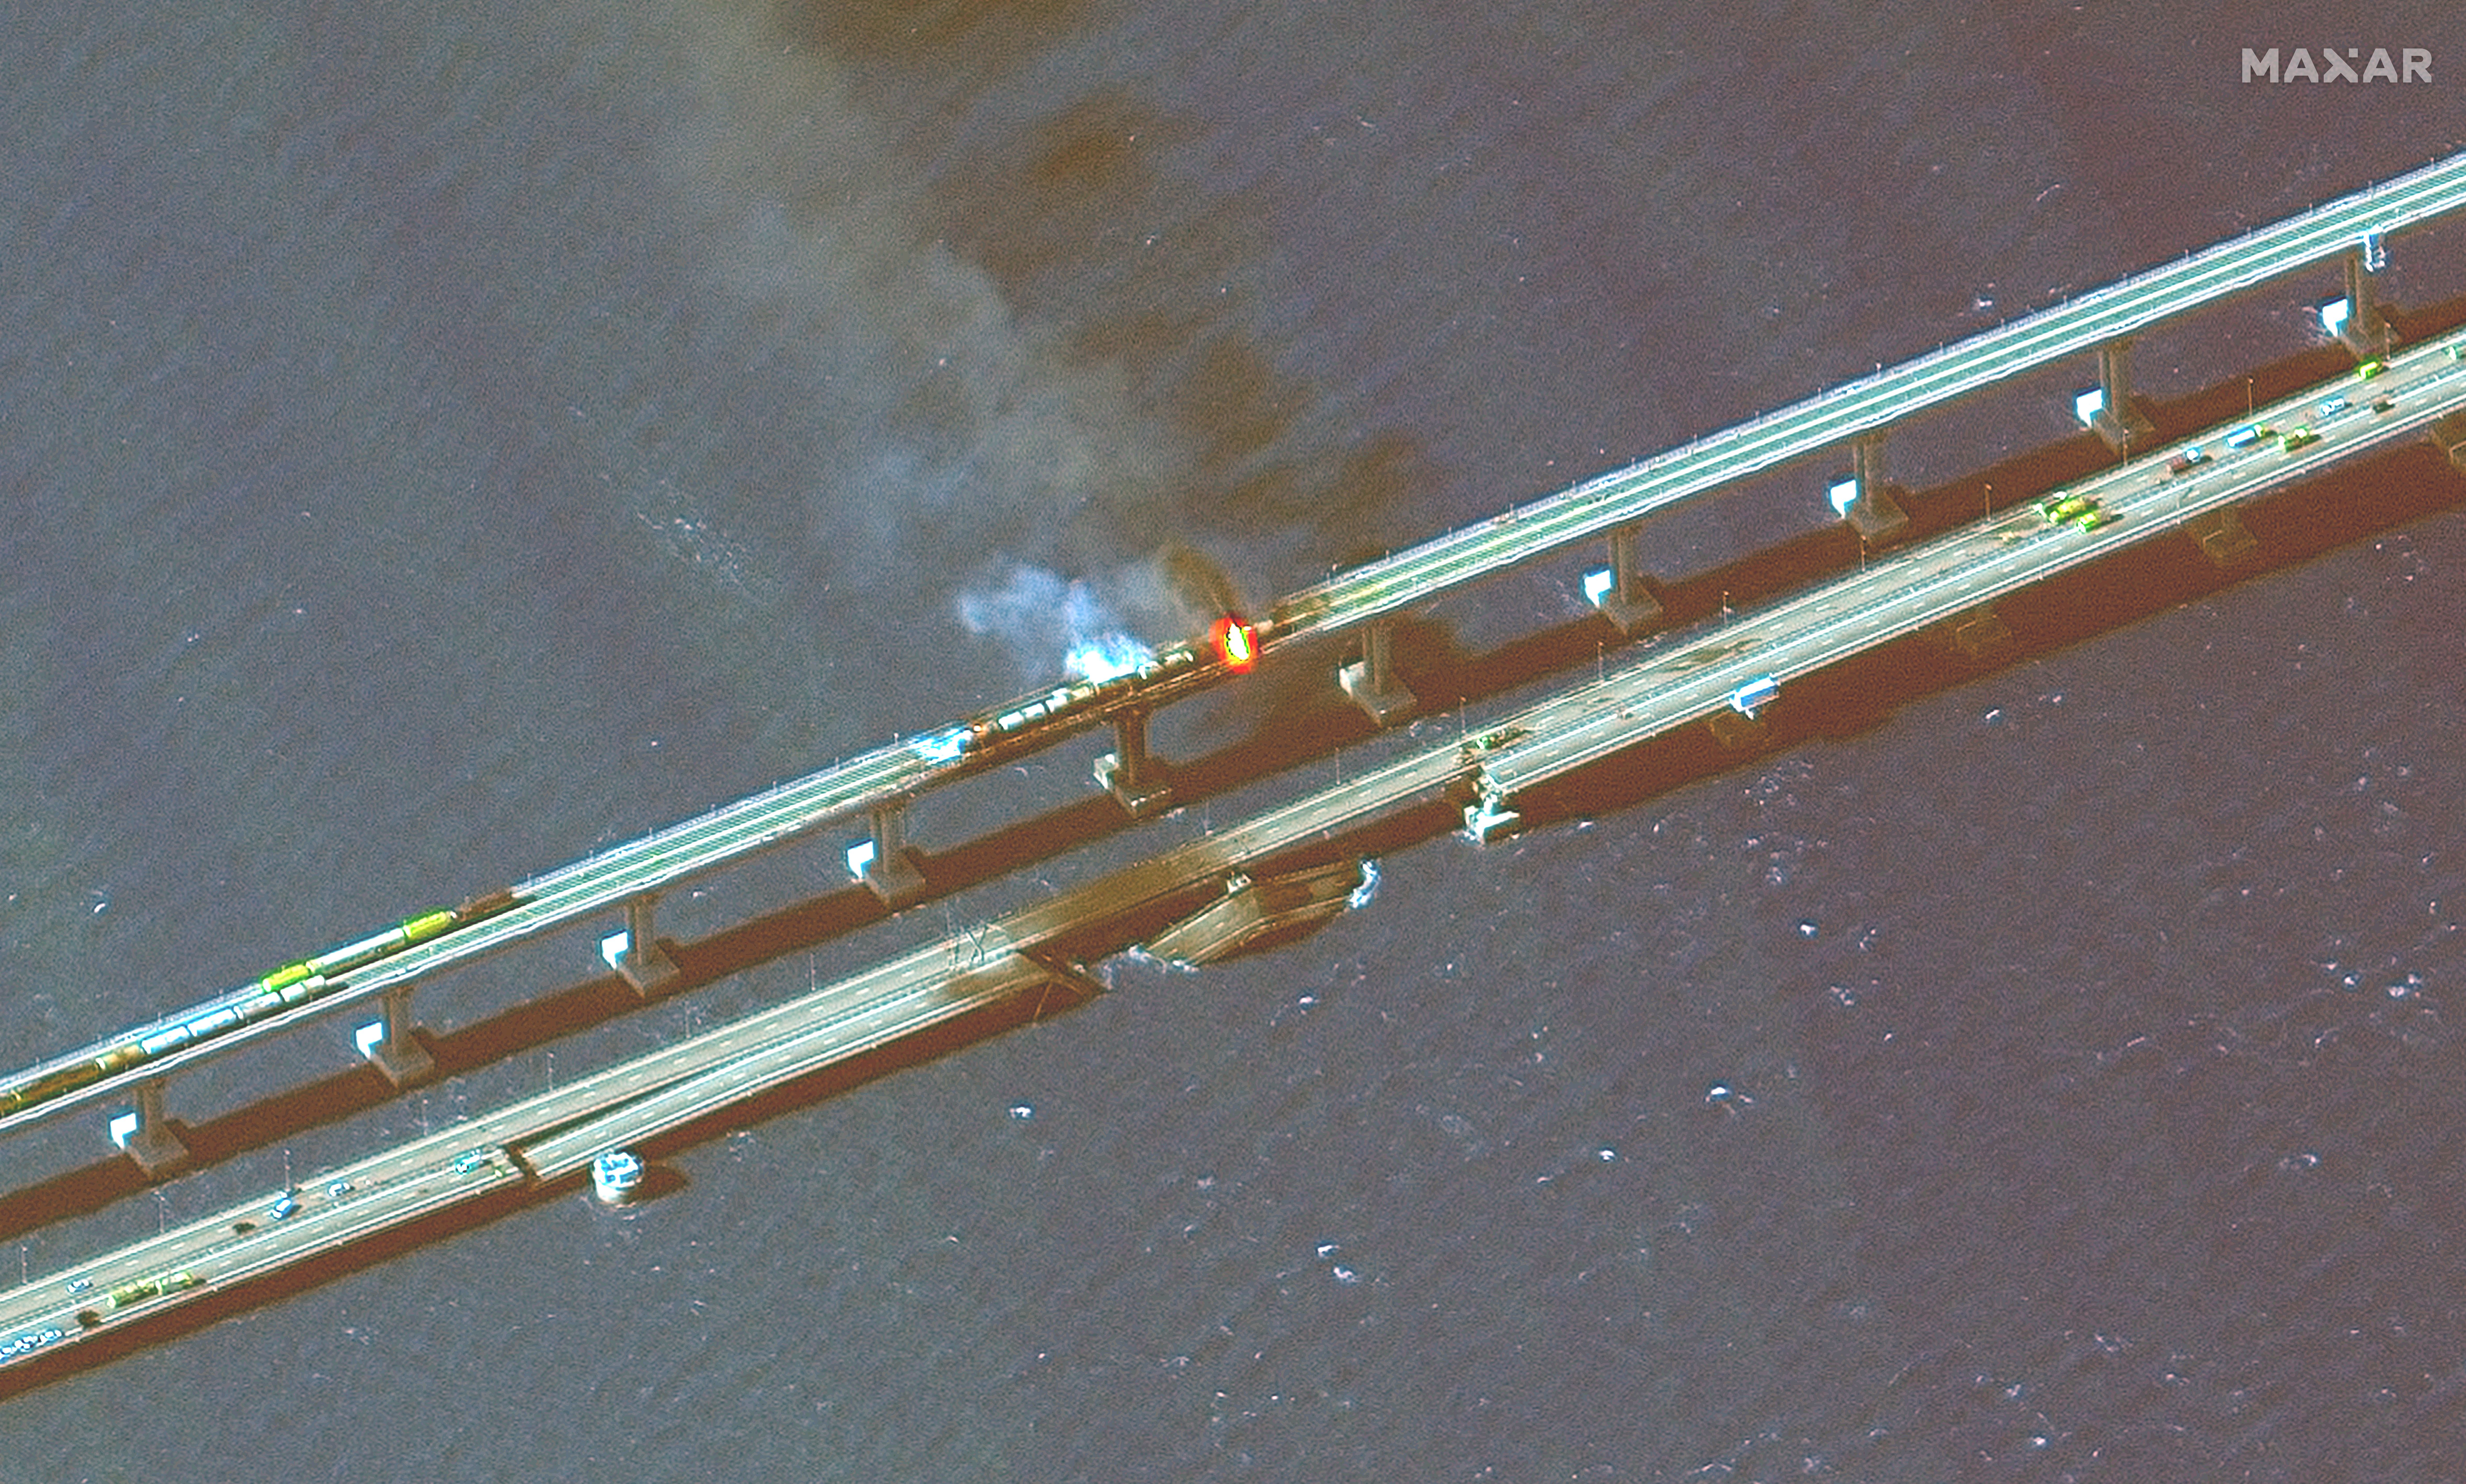 A section of the Kerch Bridge collaposed into the Kerch Straight while another portion is on fire after an explosion.